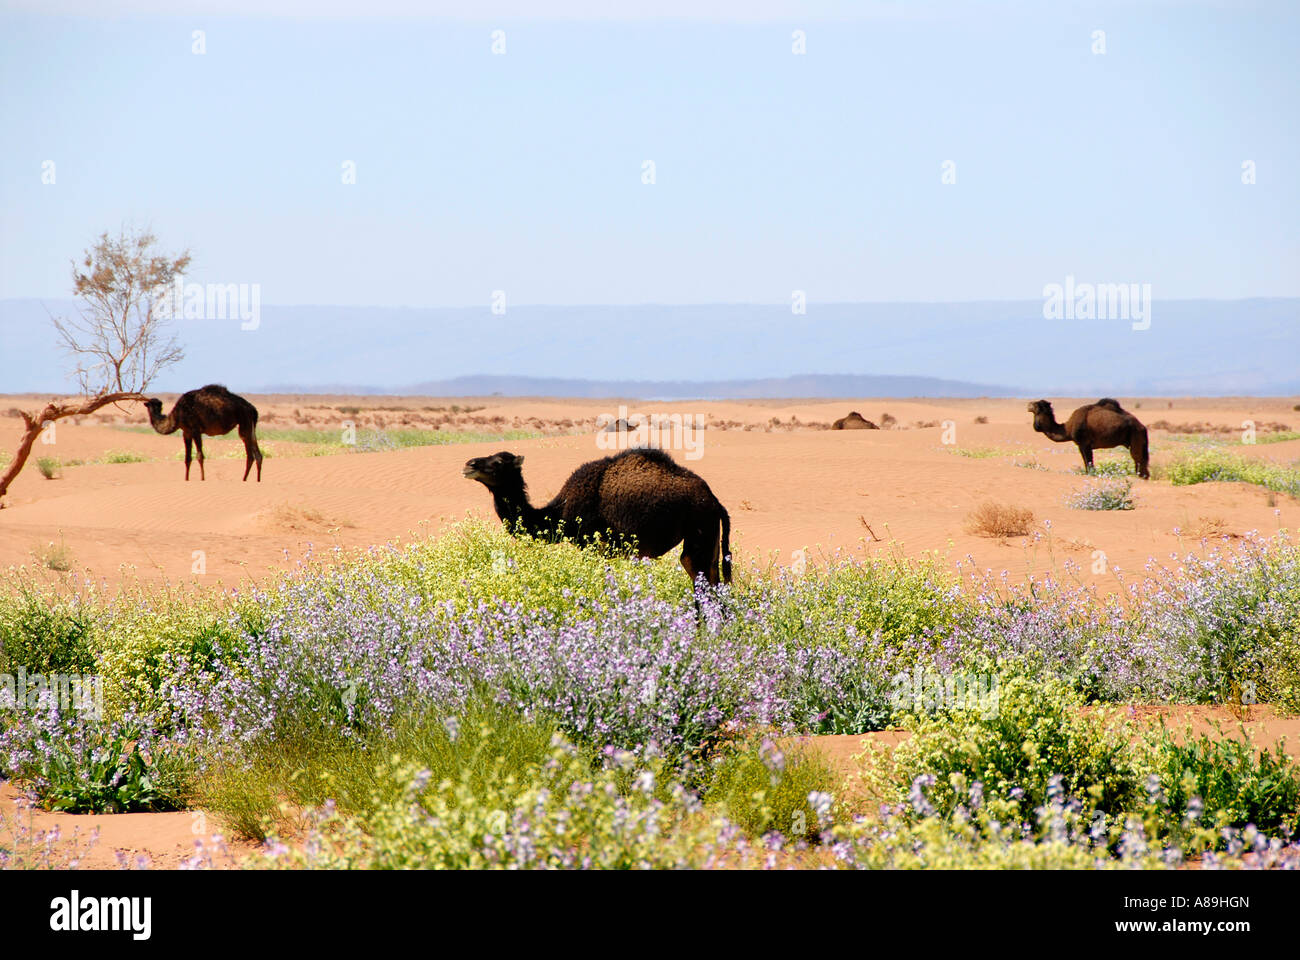 Life camels and flowering plants in the desert near Mhamid Morocco Stock Photo